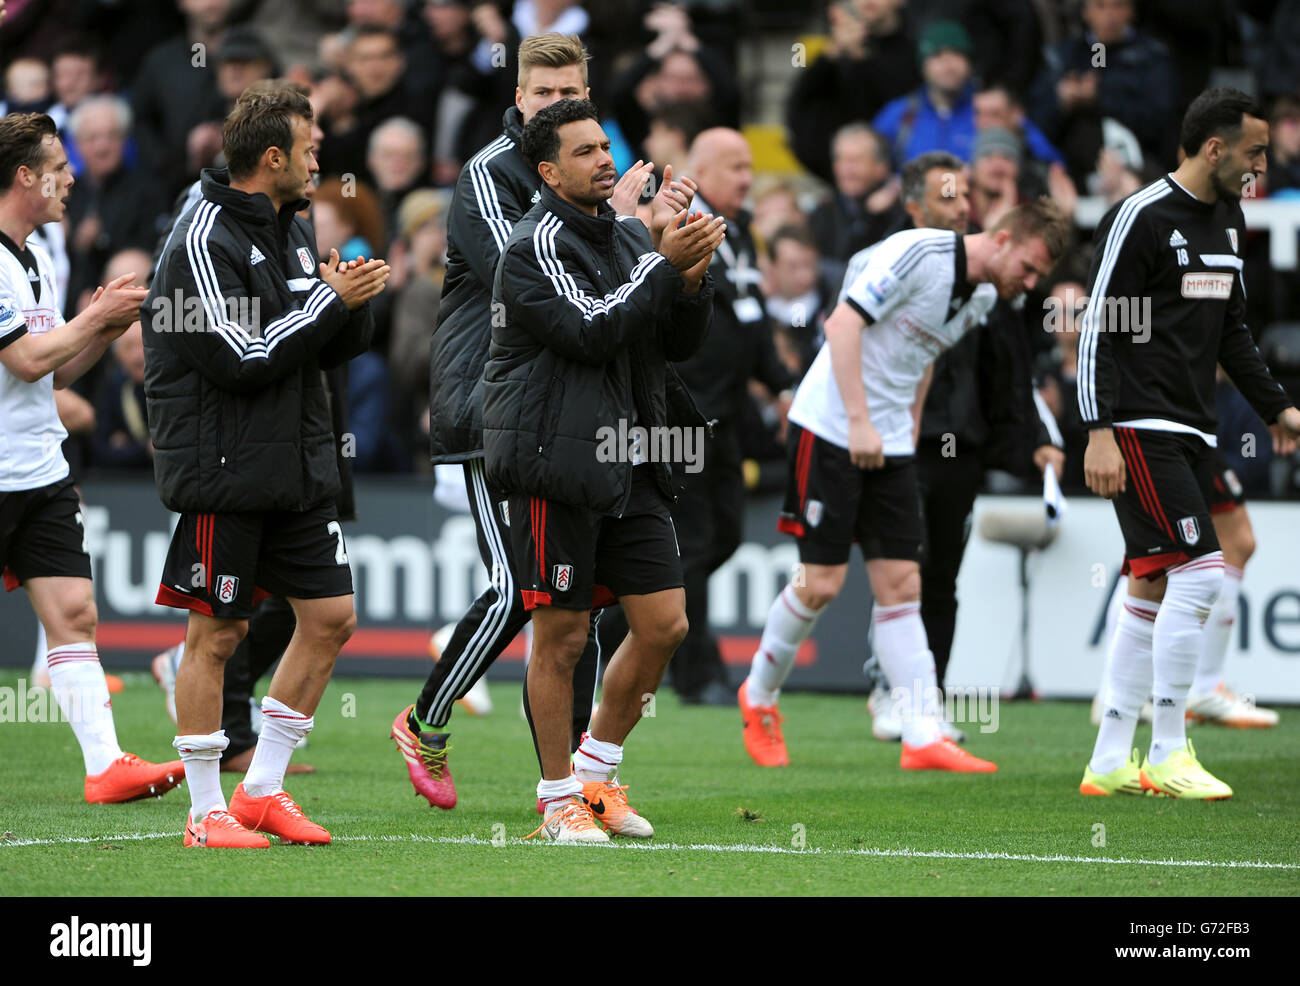 Soccer - Barclays Premier League - Fulham v Crystal Palace - Craven Cottage. Fulham players applaud the home fans during the walkabout after the final whistle Stock Photo